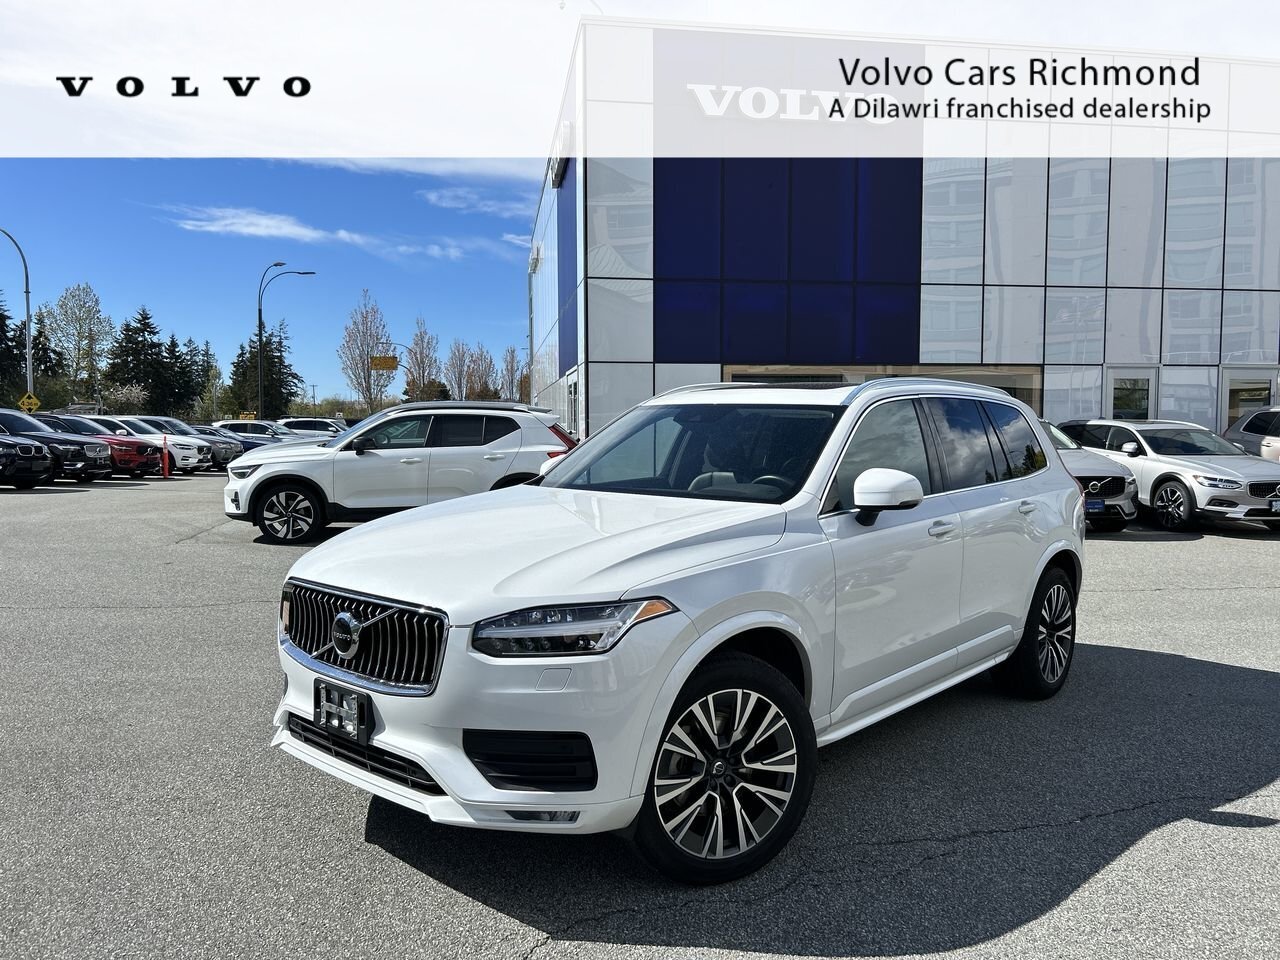 2021 Volvo XC90 T6 AWD Momentum (7-Seat) | Finance from 3.24% OAC 